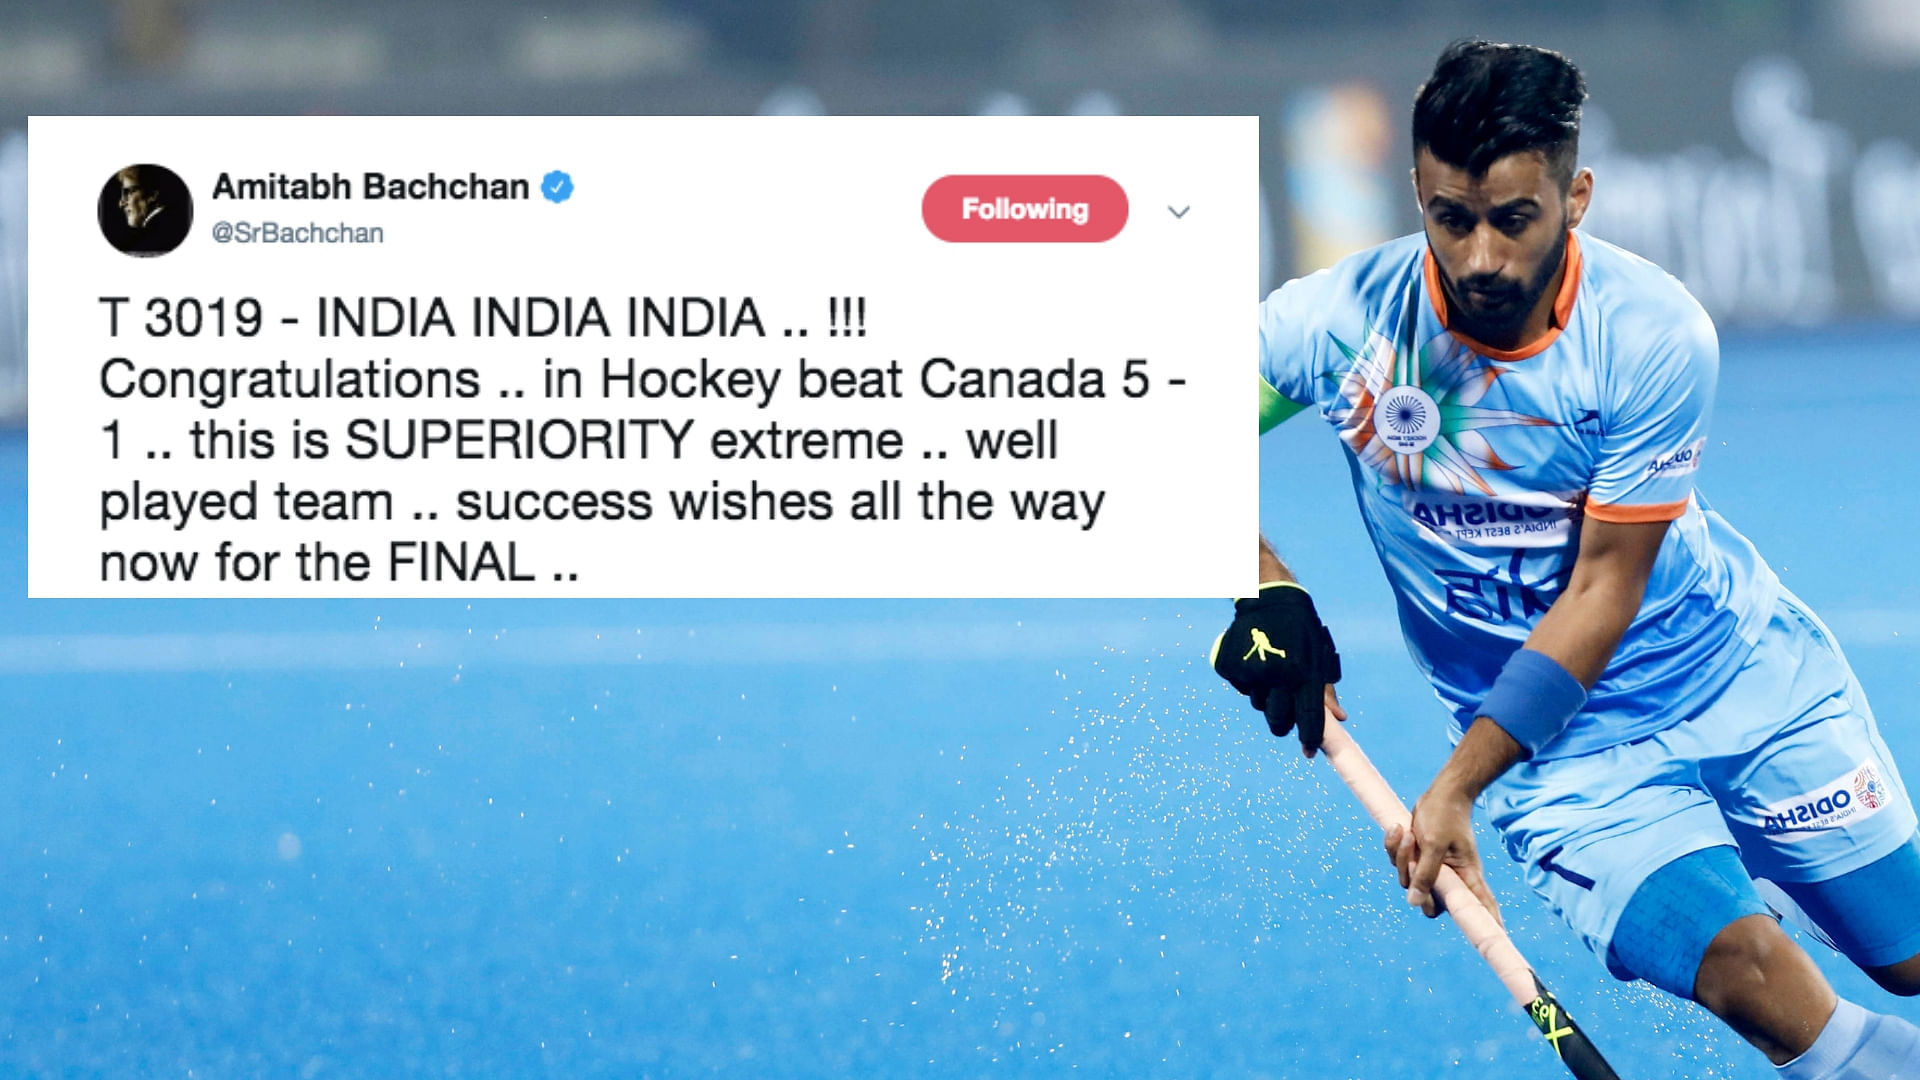 Bollywood star Amitabh Bachchan lauded Indian men’s hockey team’s performance at the World Cup.